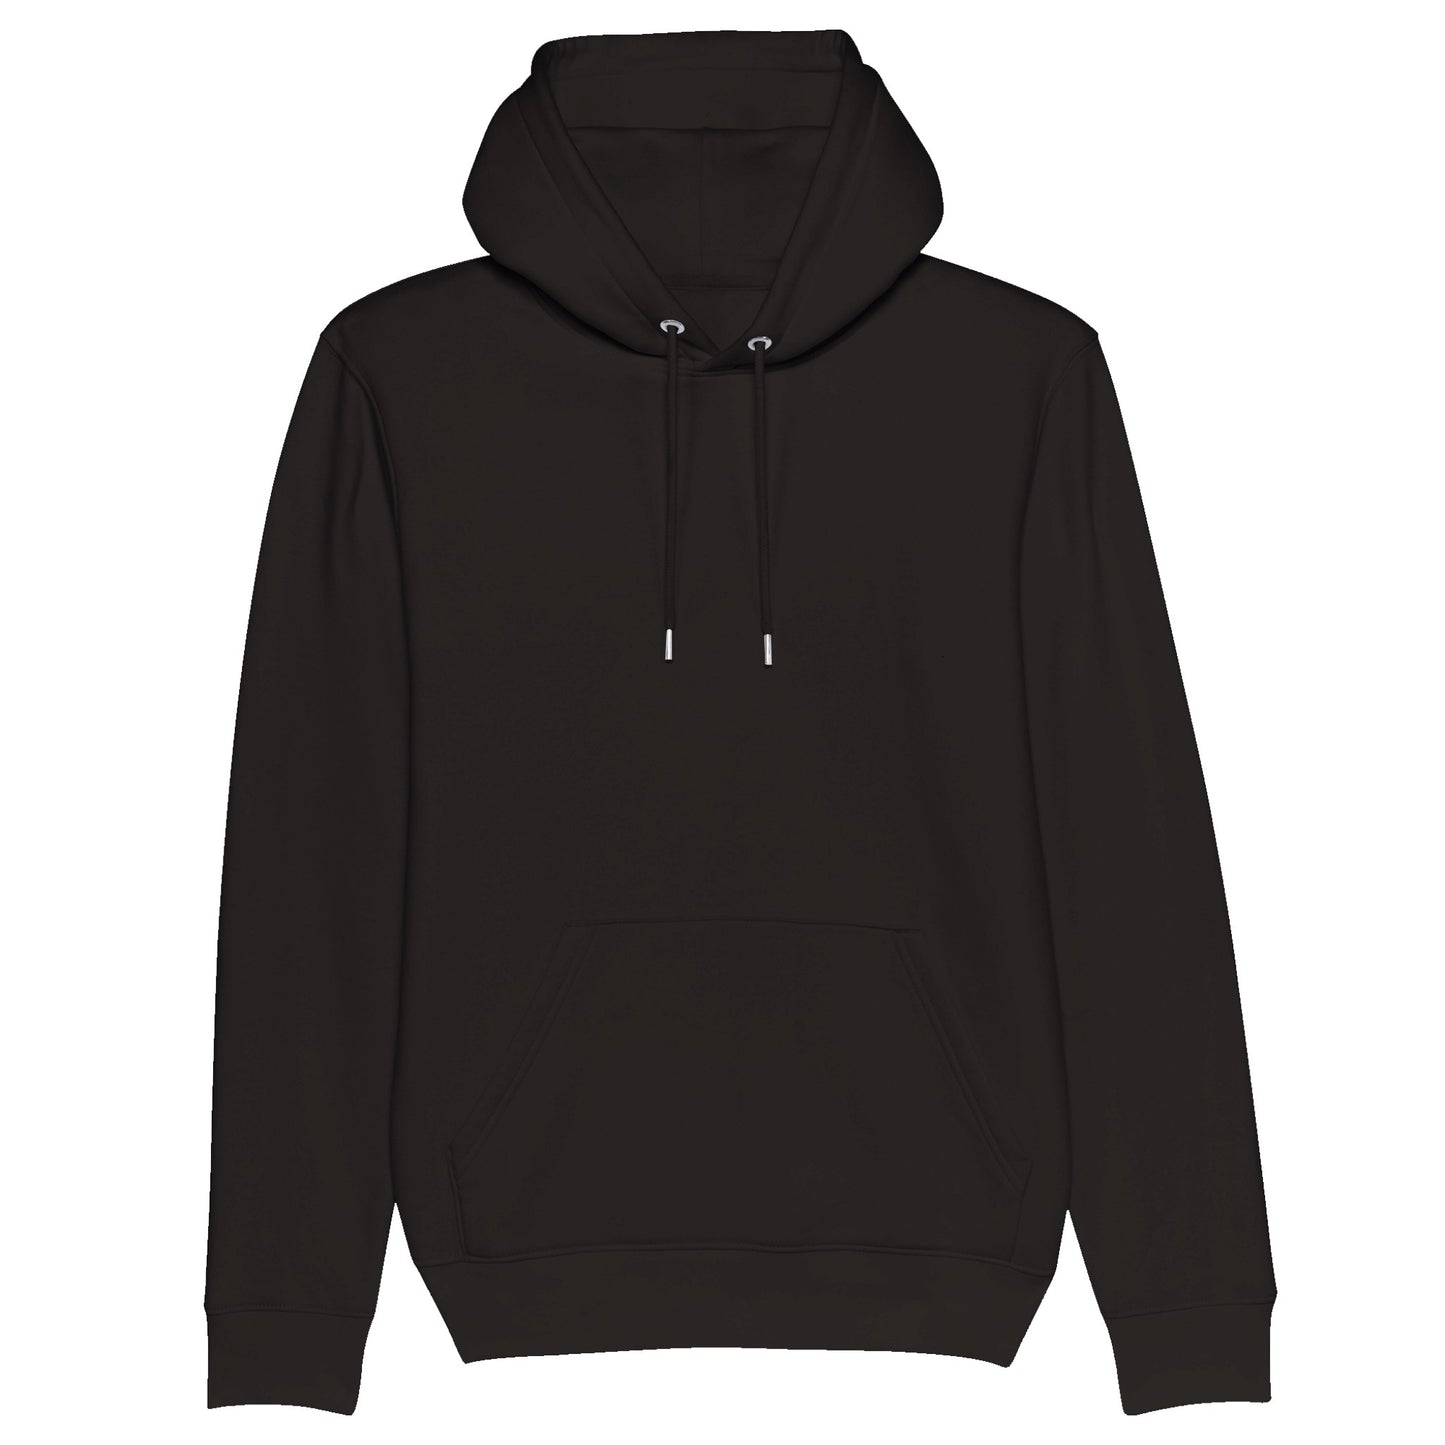 Cranky? Try this organic unisex pullover hoodie